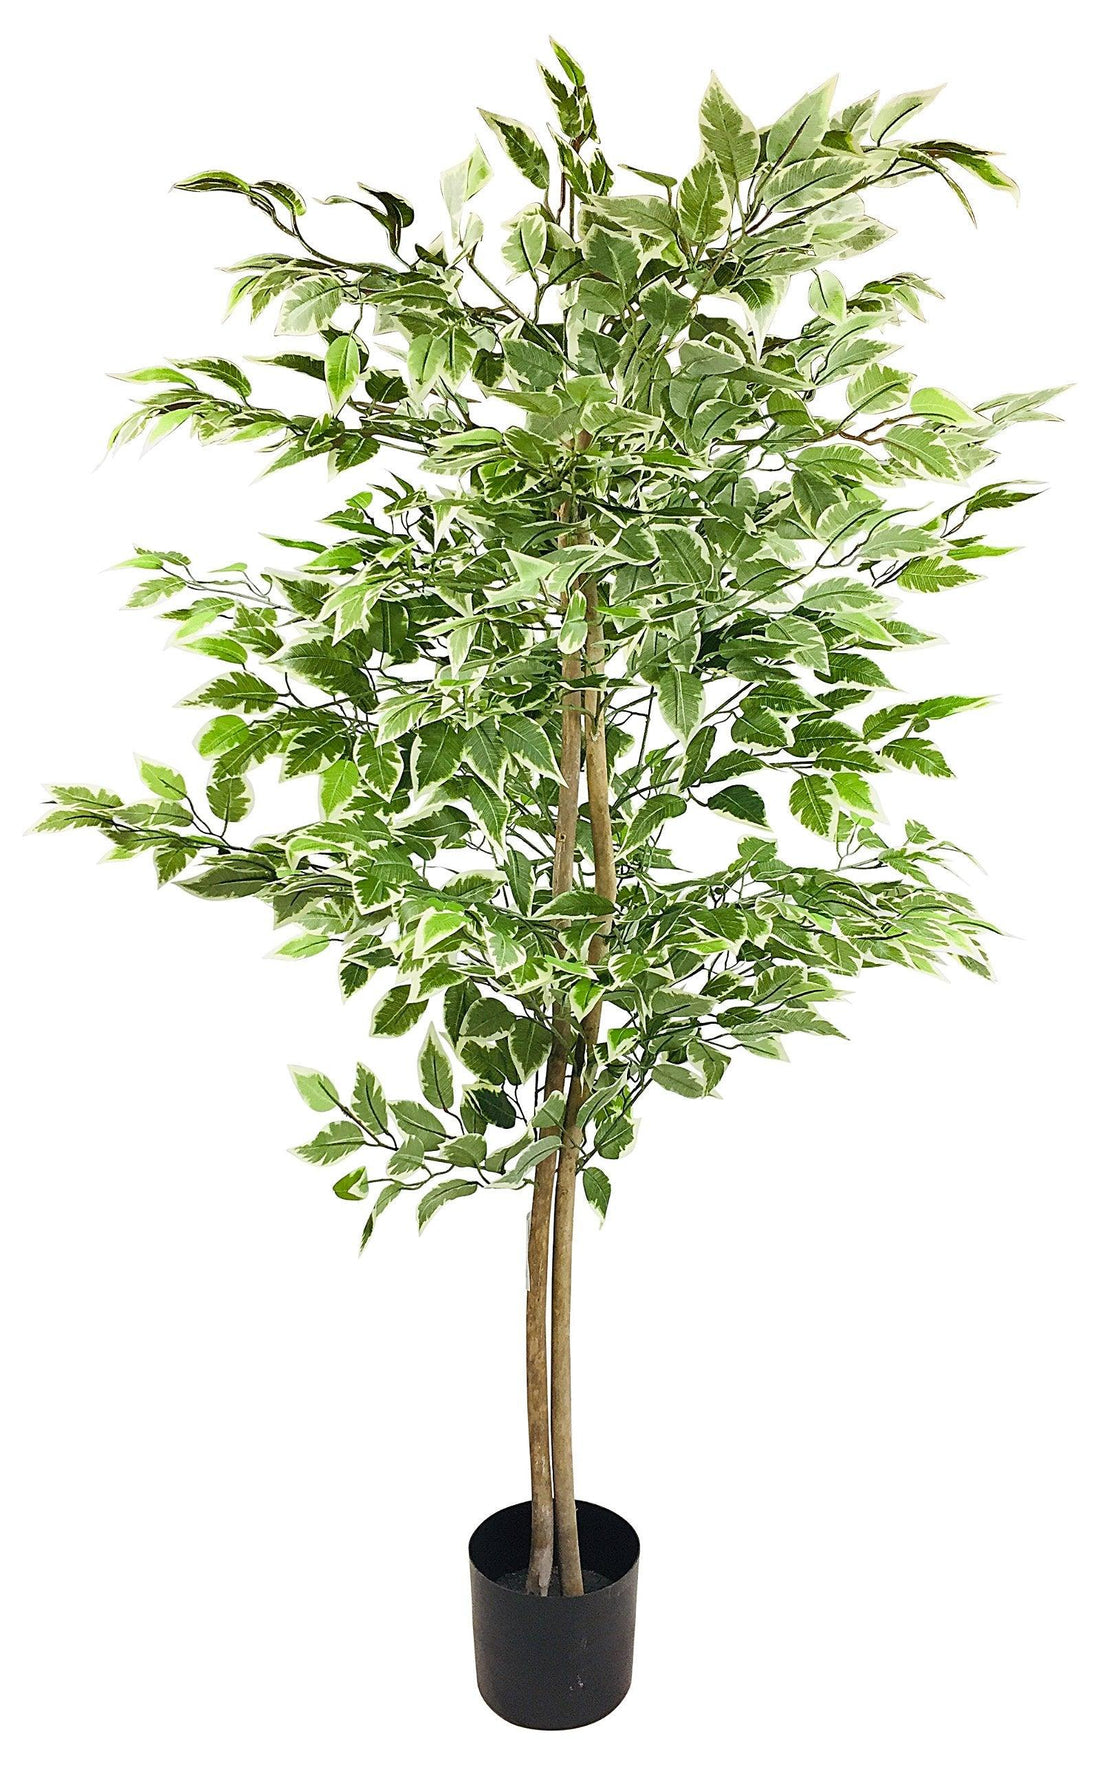 Artificial Ficus Tree With Variegation Leaves 150cm - £118.99 - Artificial Plants 